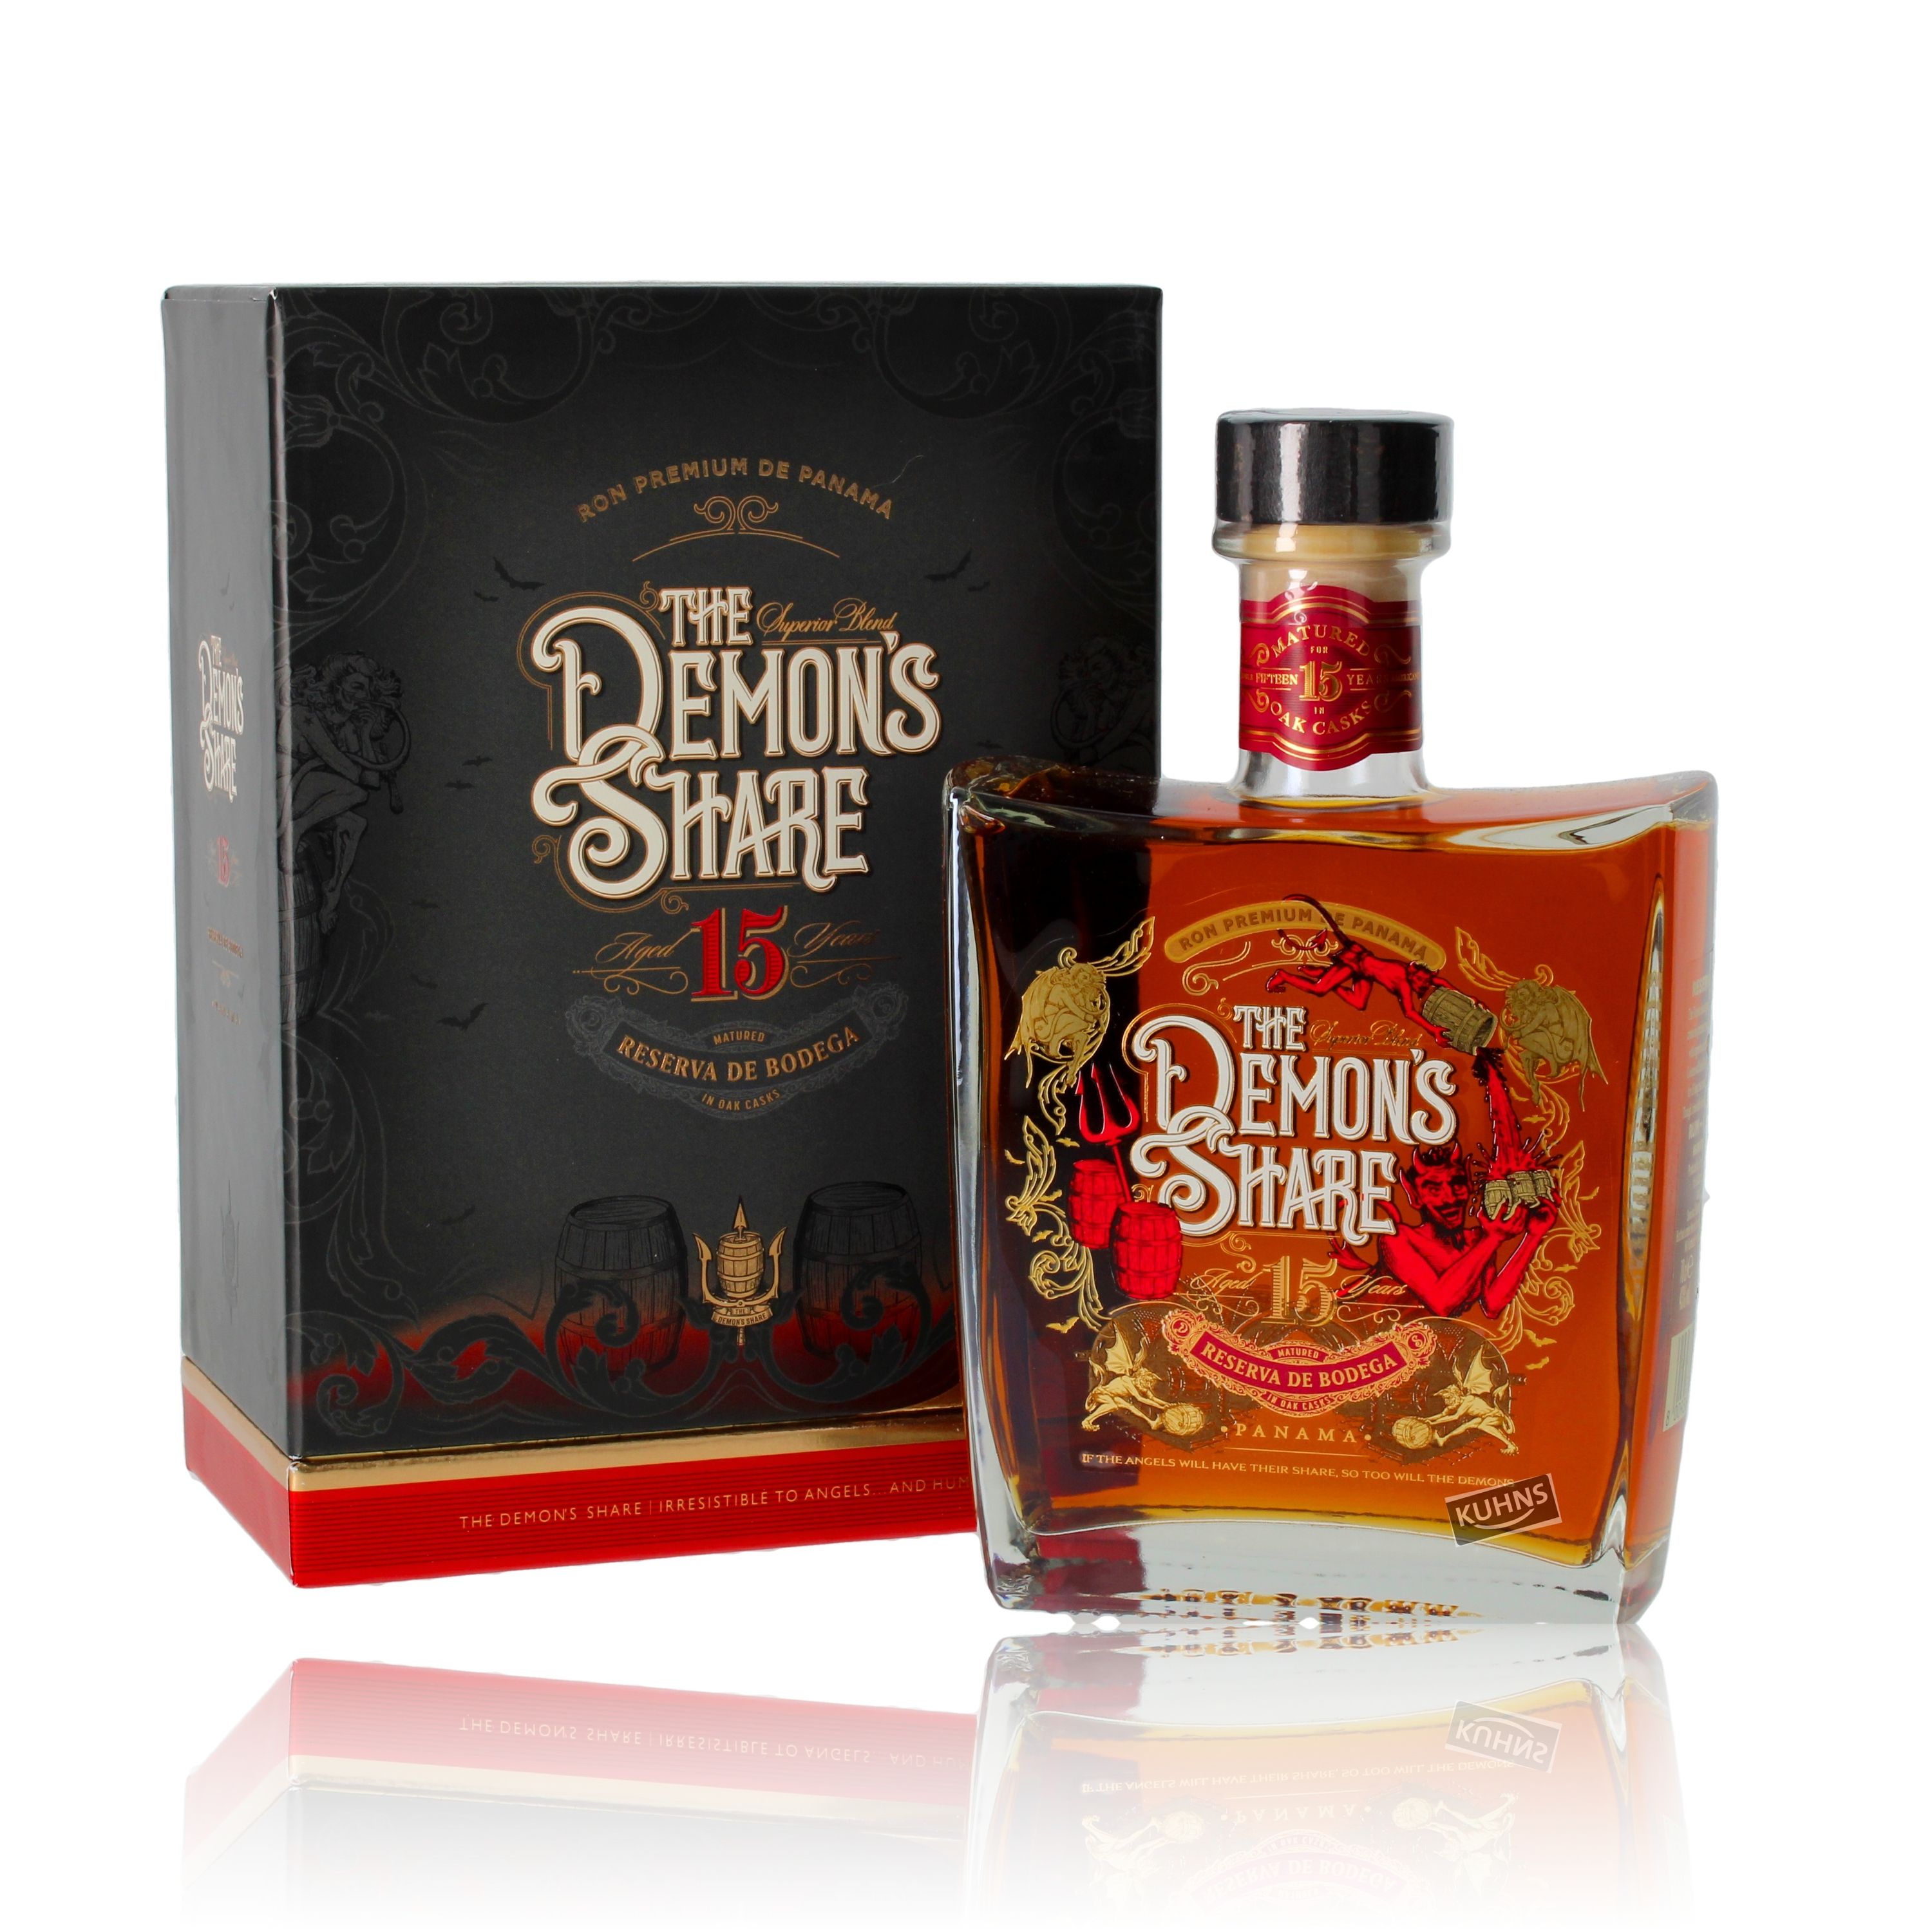 The Demon's Share 15 years 0.7l, alc. 43% by volume, Rum Panama